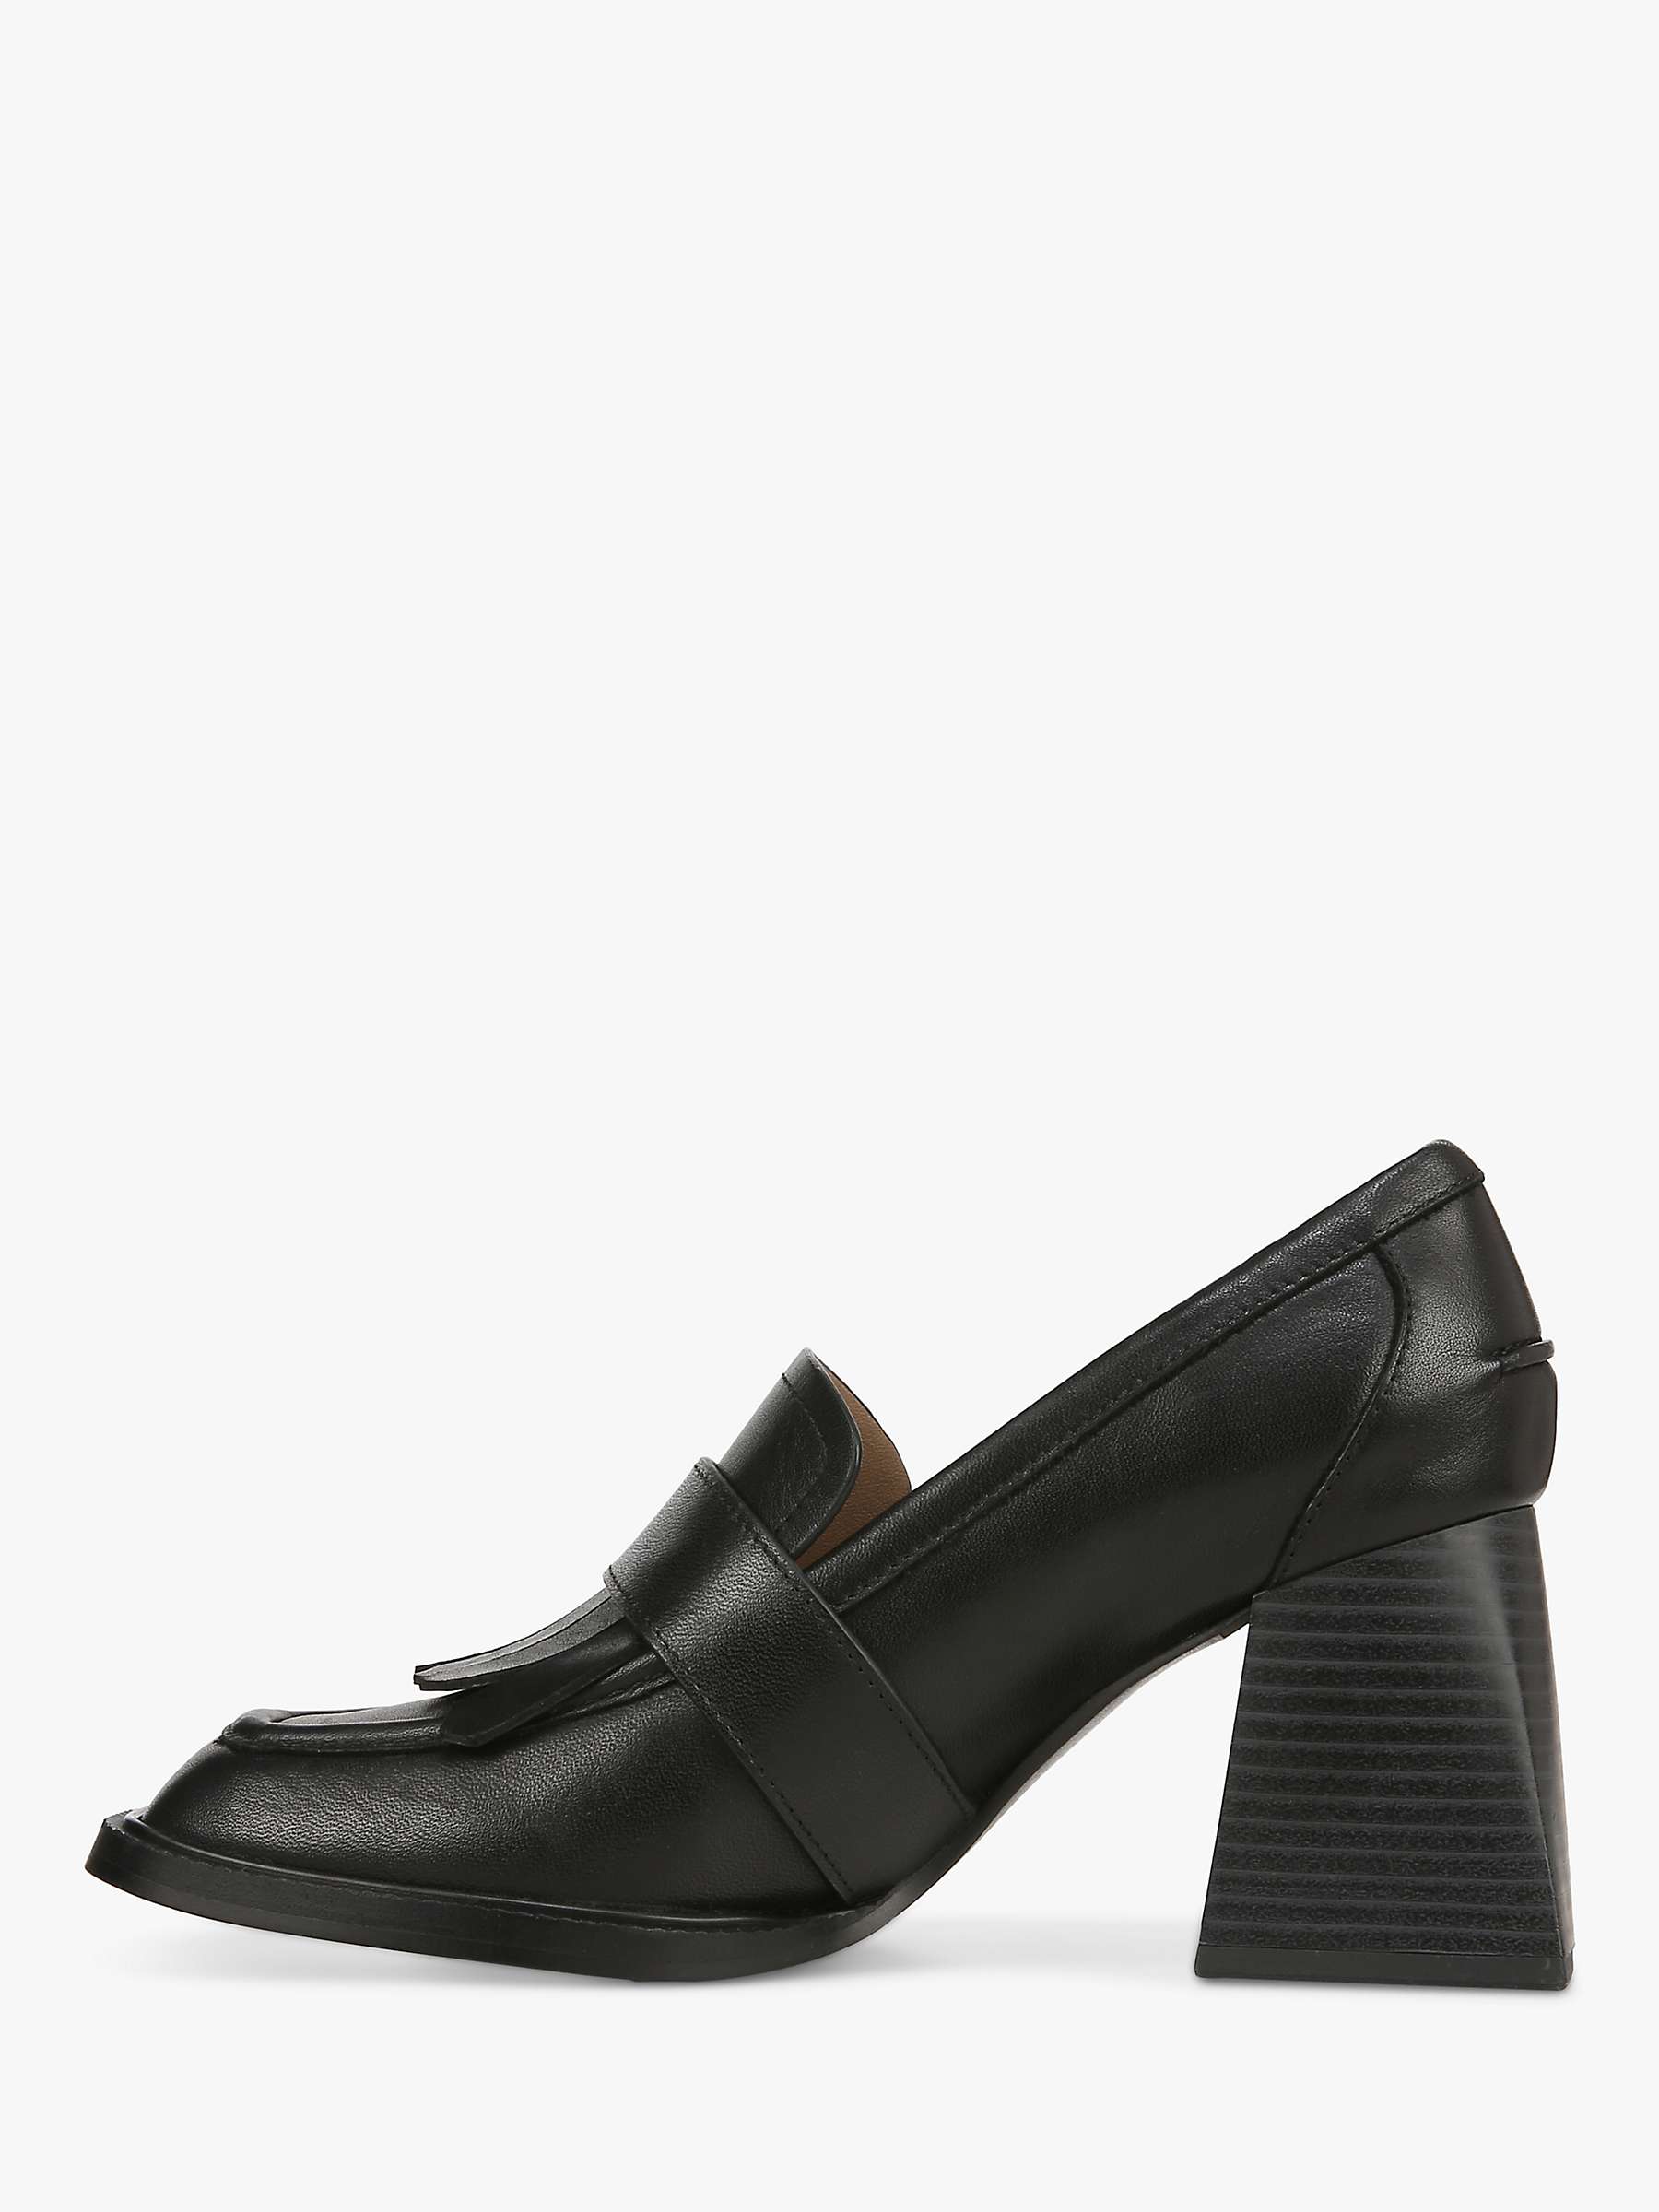 Buy Sam Edelman Quinly Heeled Loafers Online at johnlewis.com